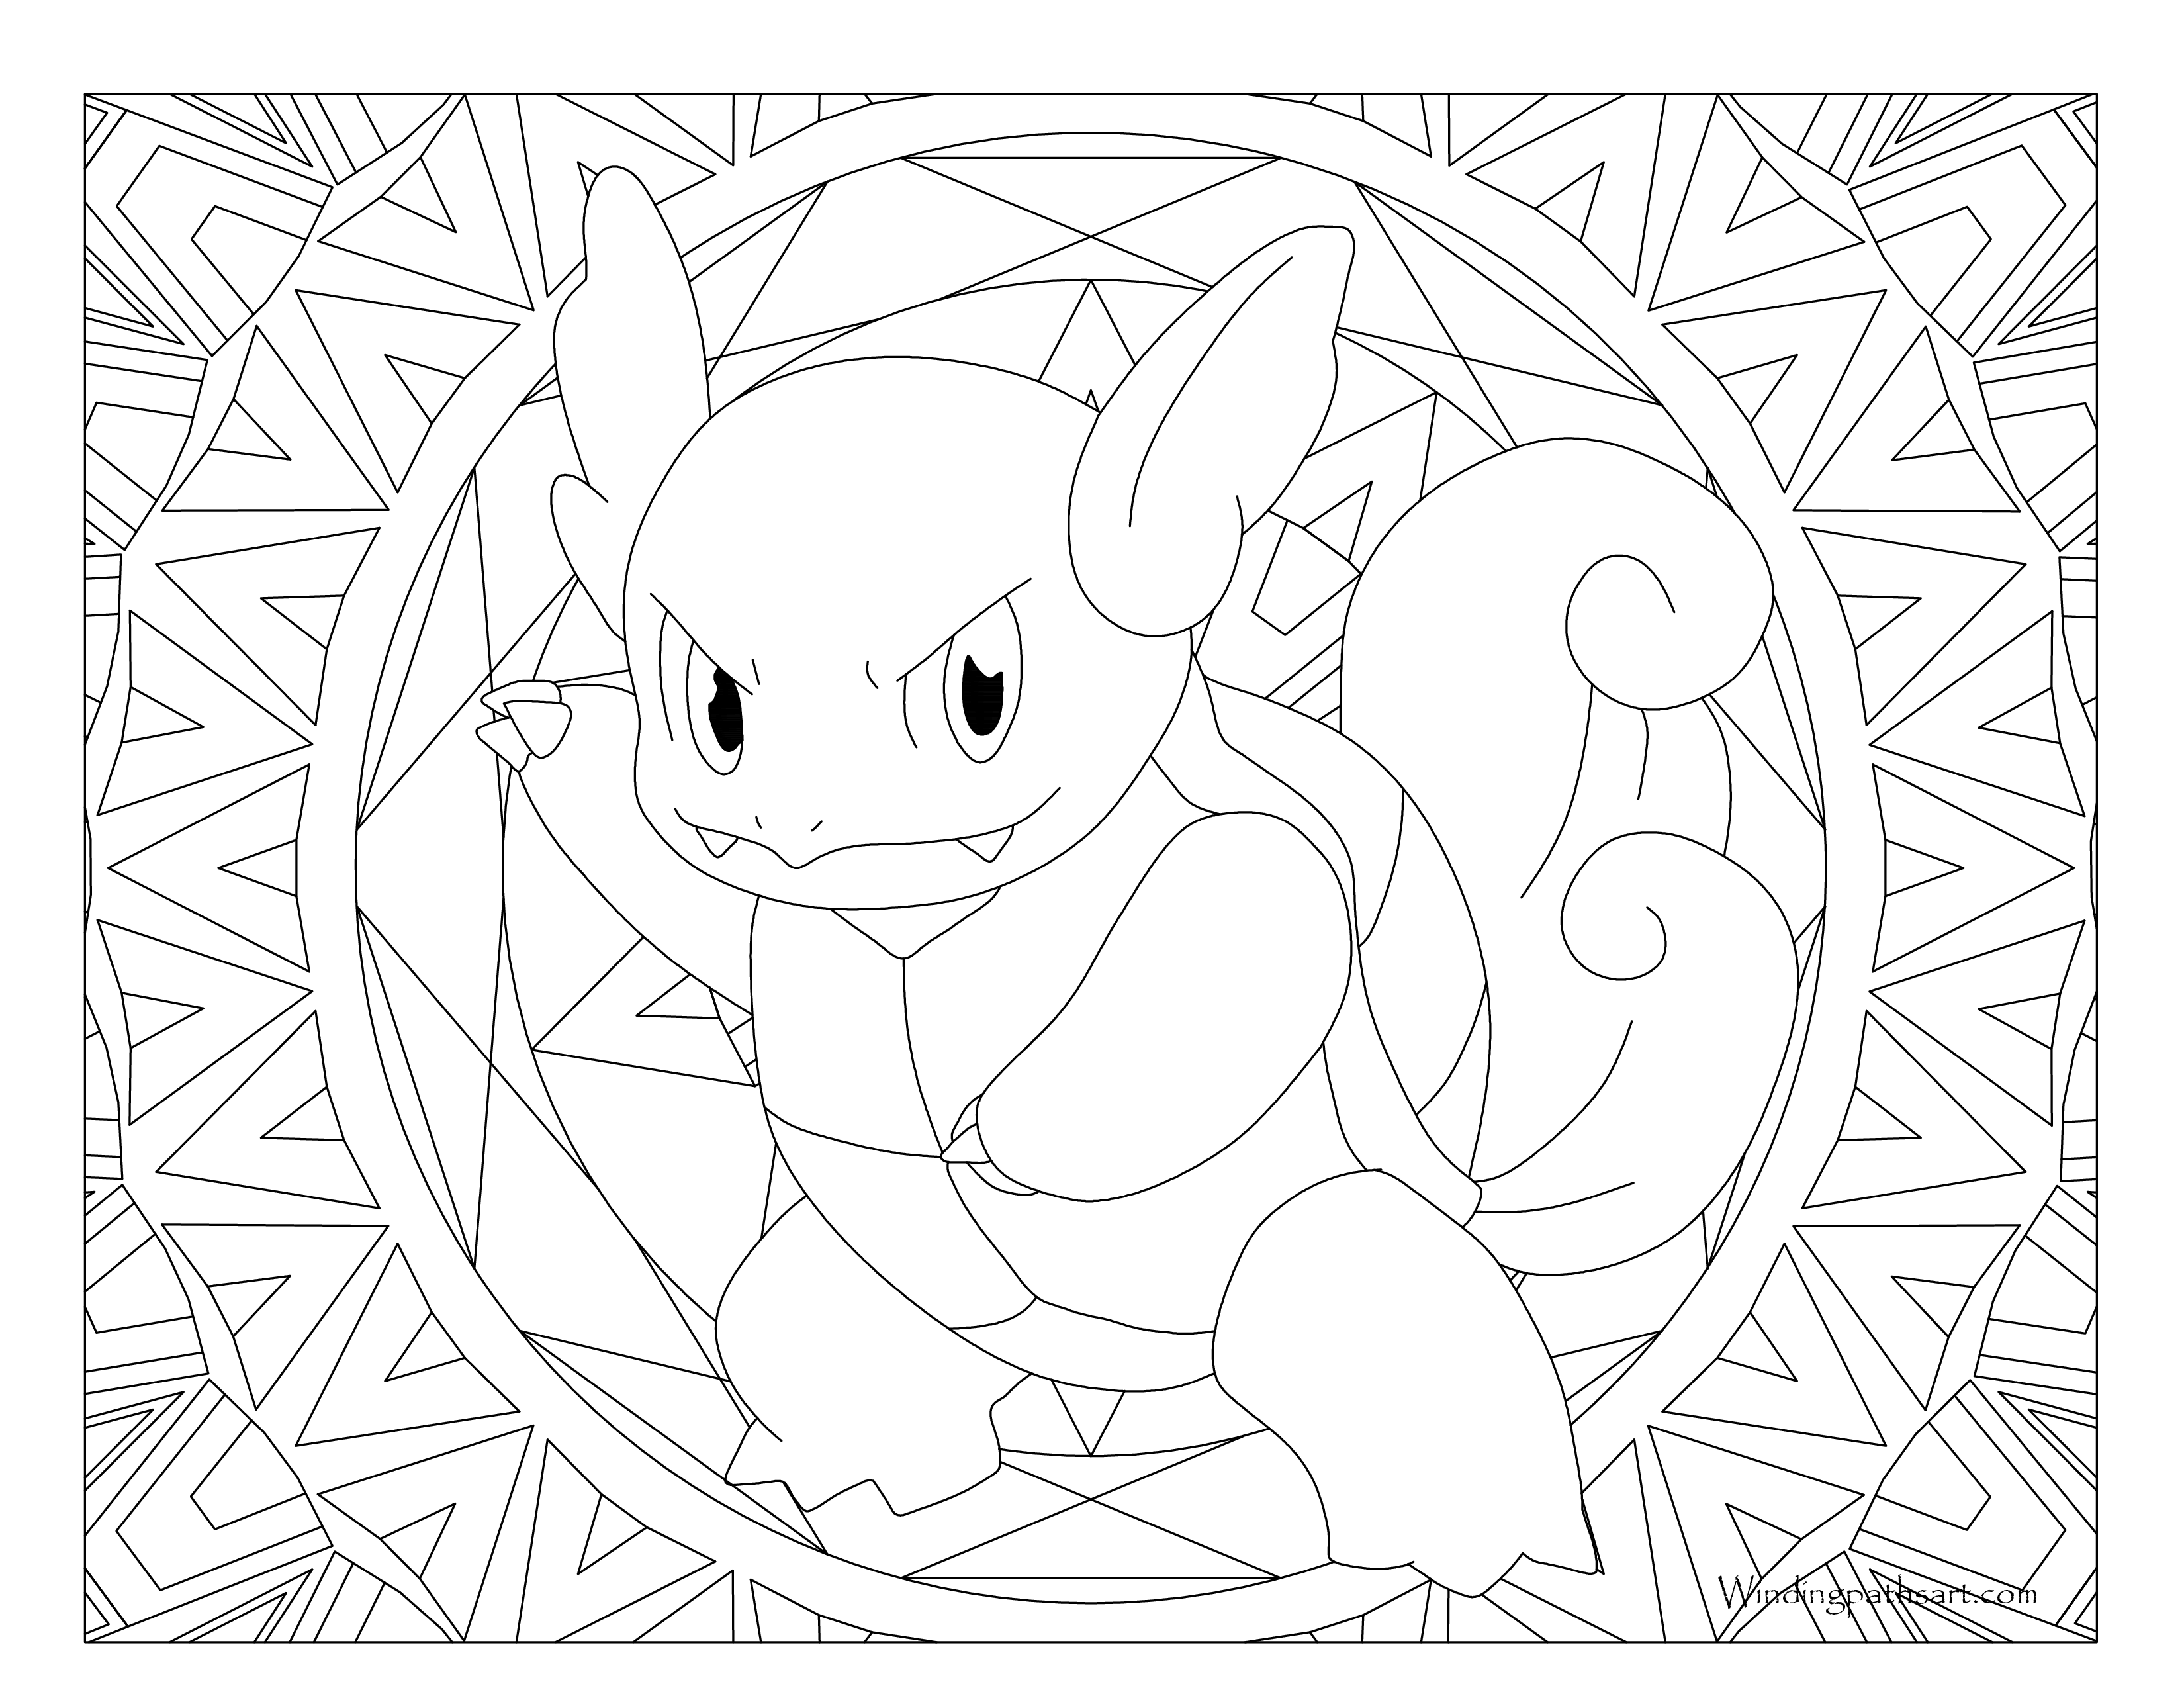 Pokemon coloring pages on